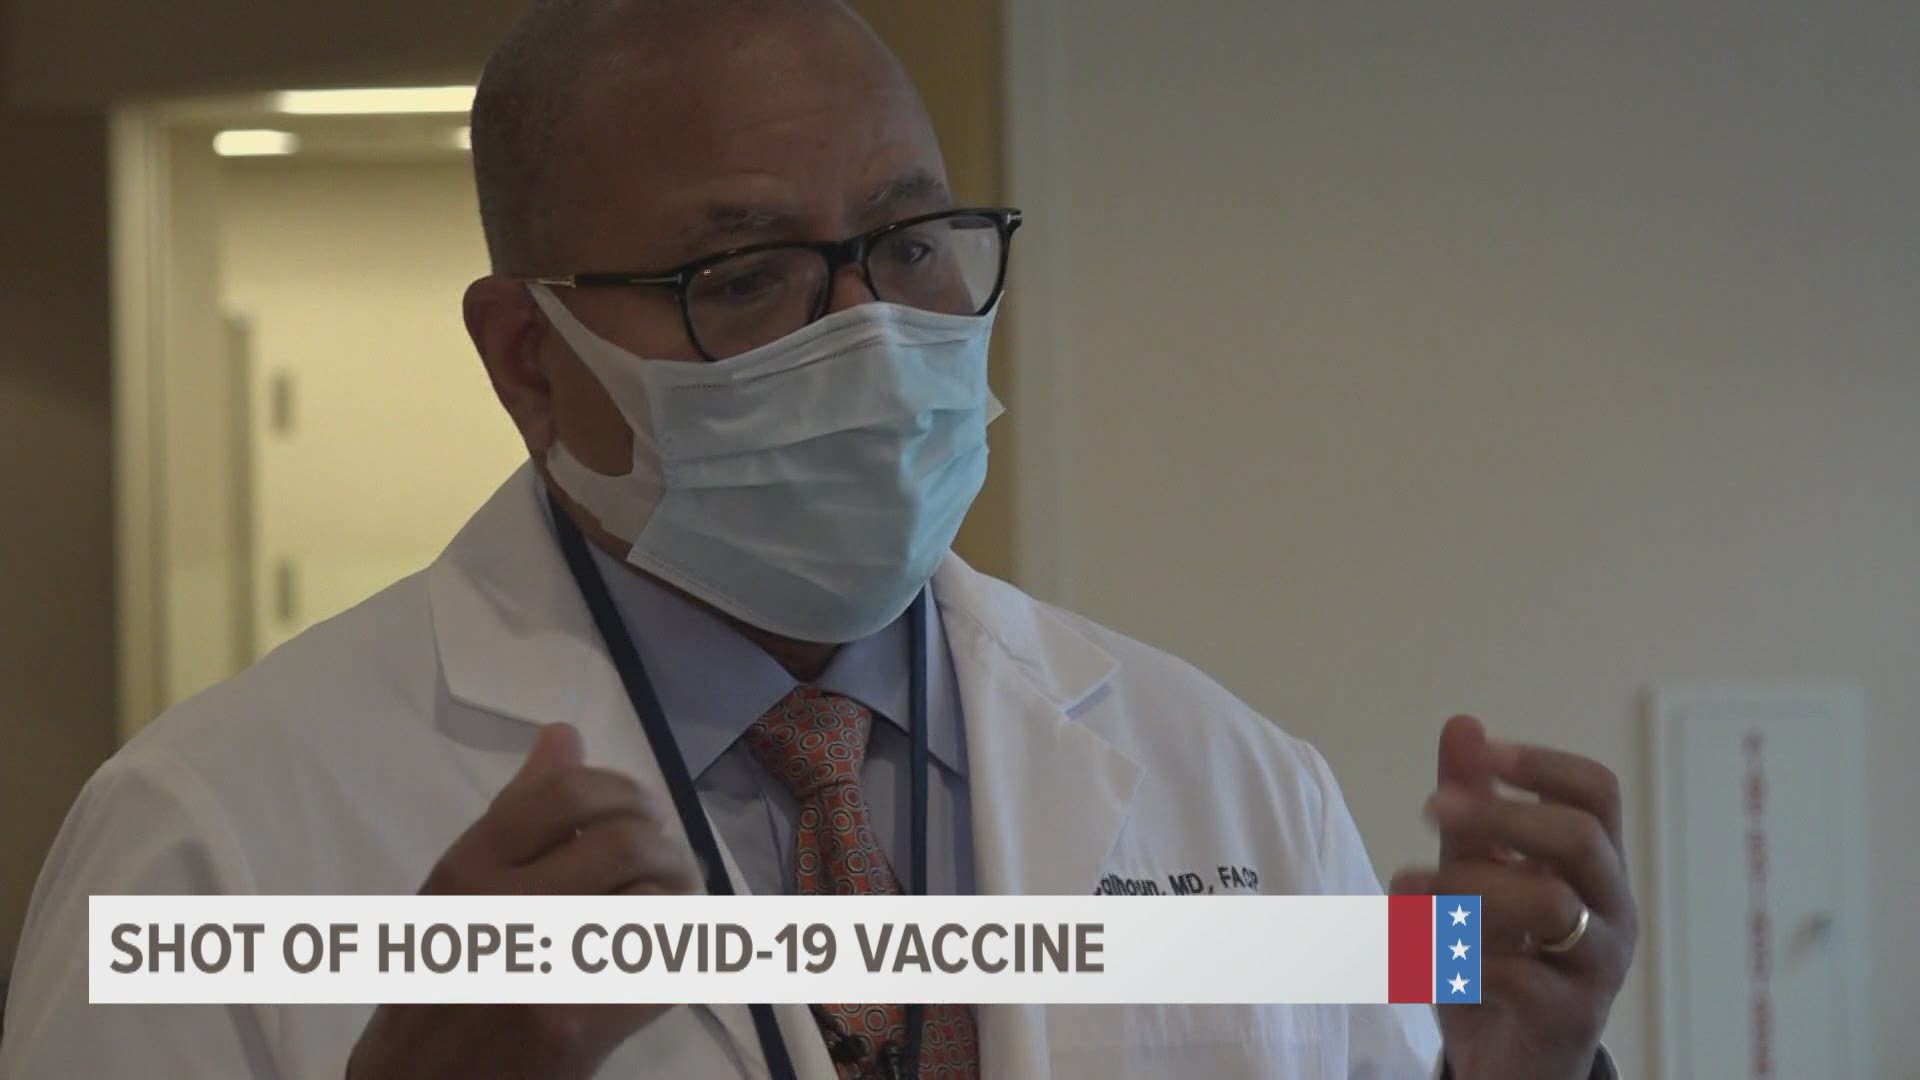 The president of UT Health Science Center discusses how it feels to watch his staff members receive their first doses of Pfizer's COVID-19 vaccine